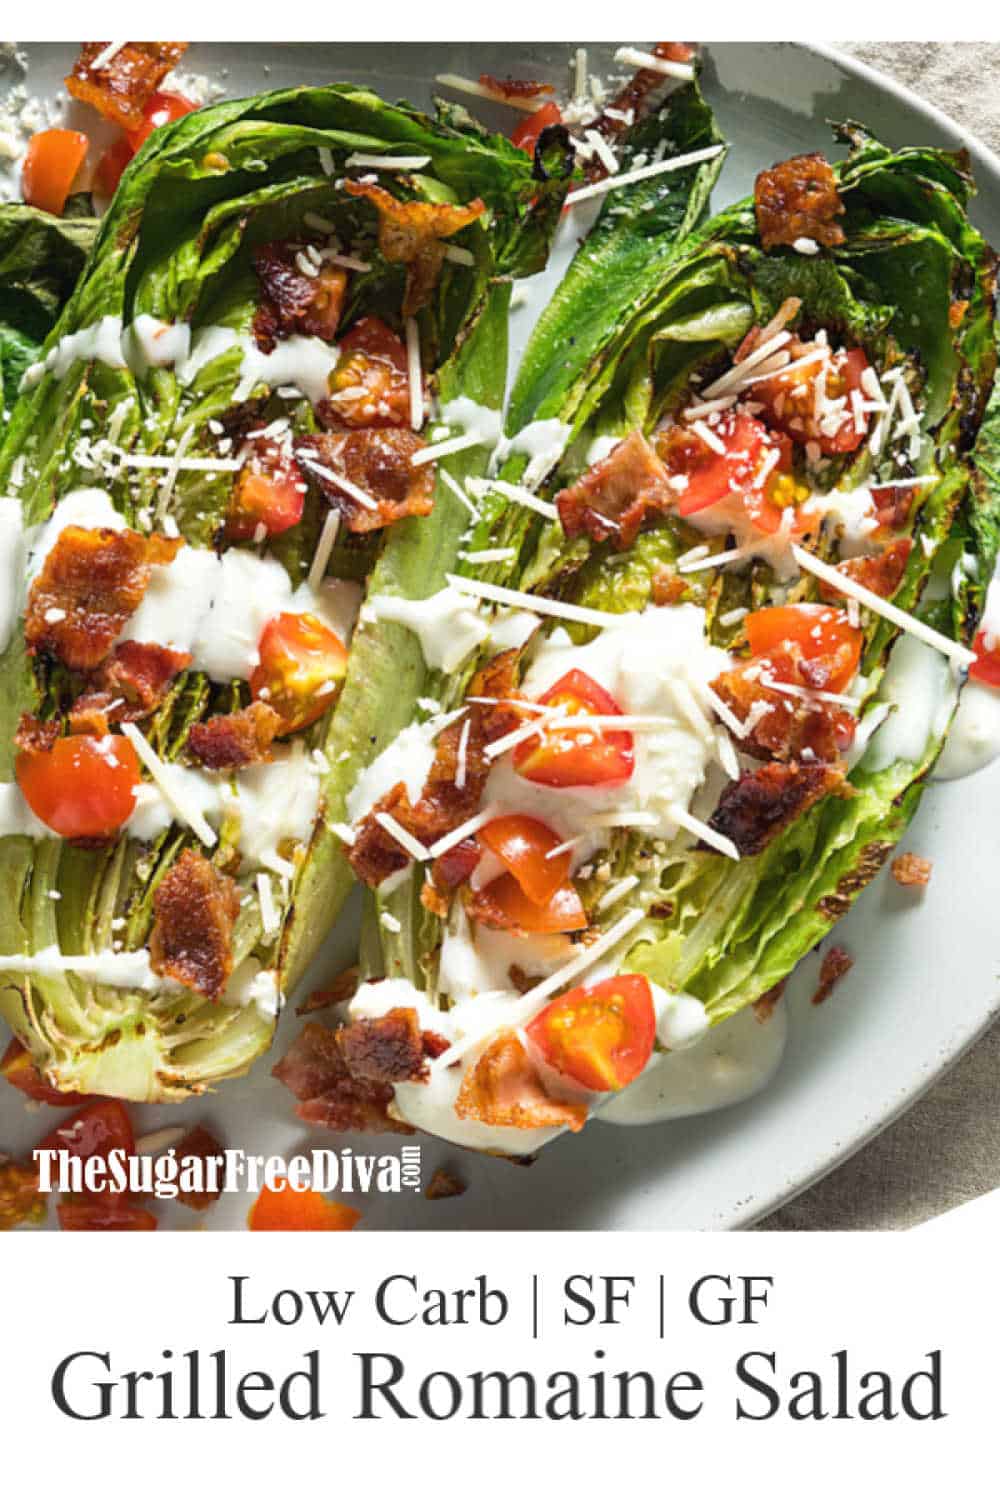 Grilled romaine lettuce with salad dressing, diced tomatoes, bacon, and parmesan cheese on a plate.